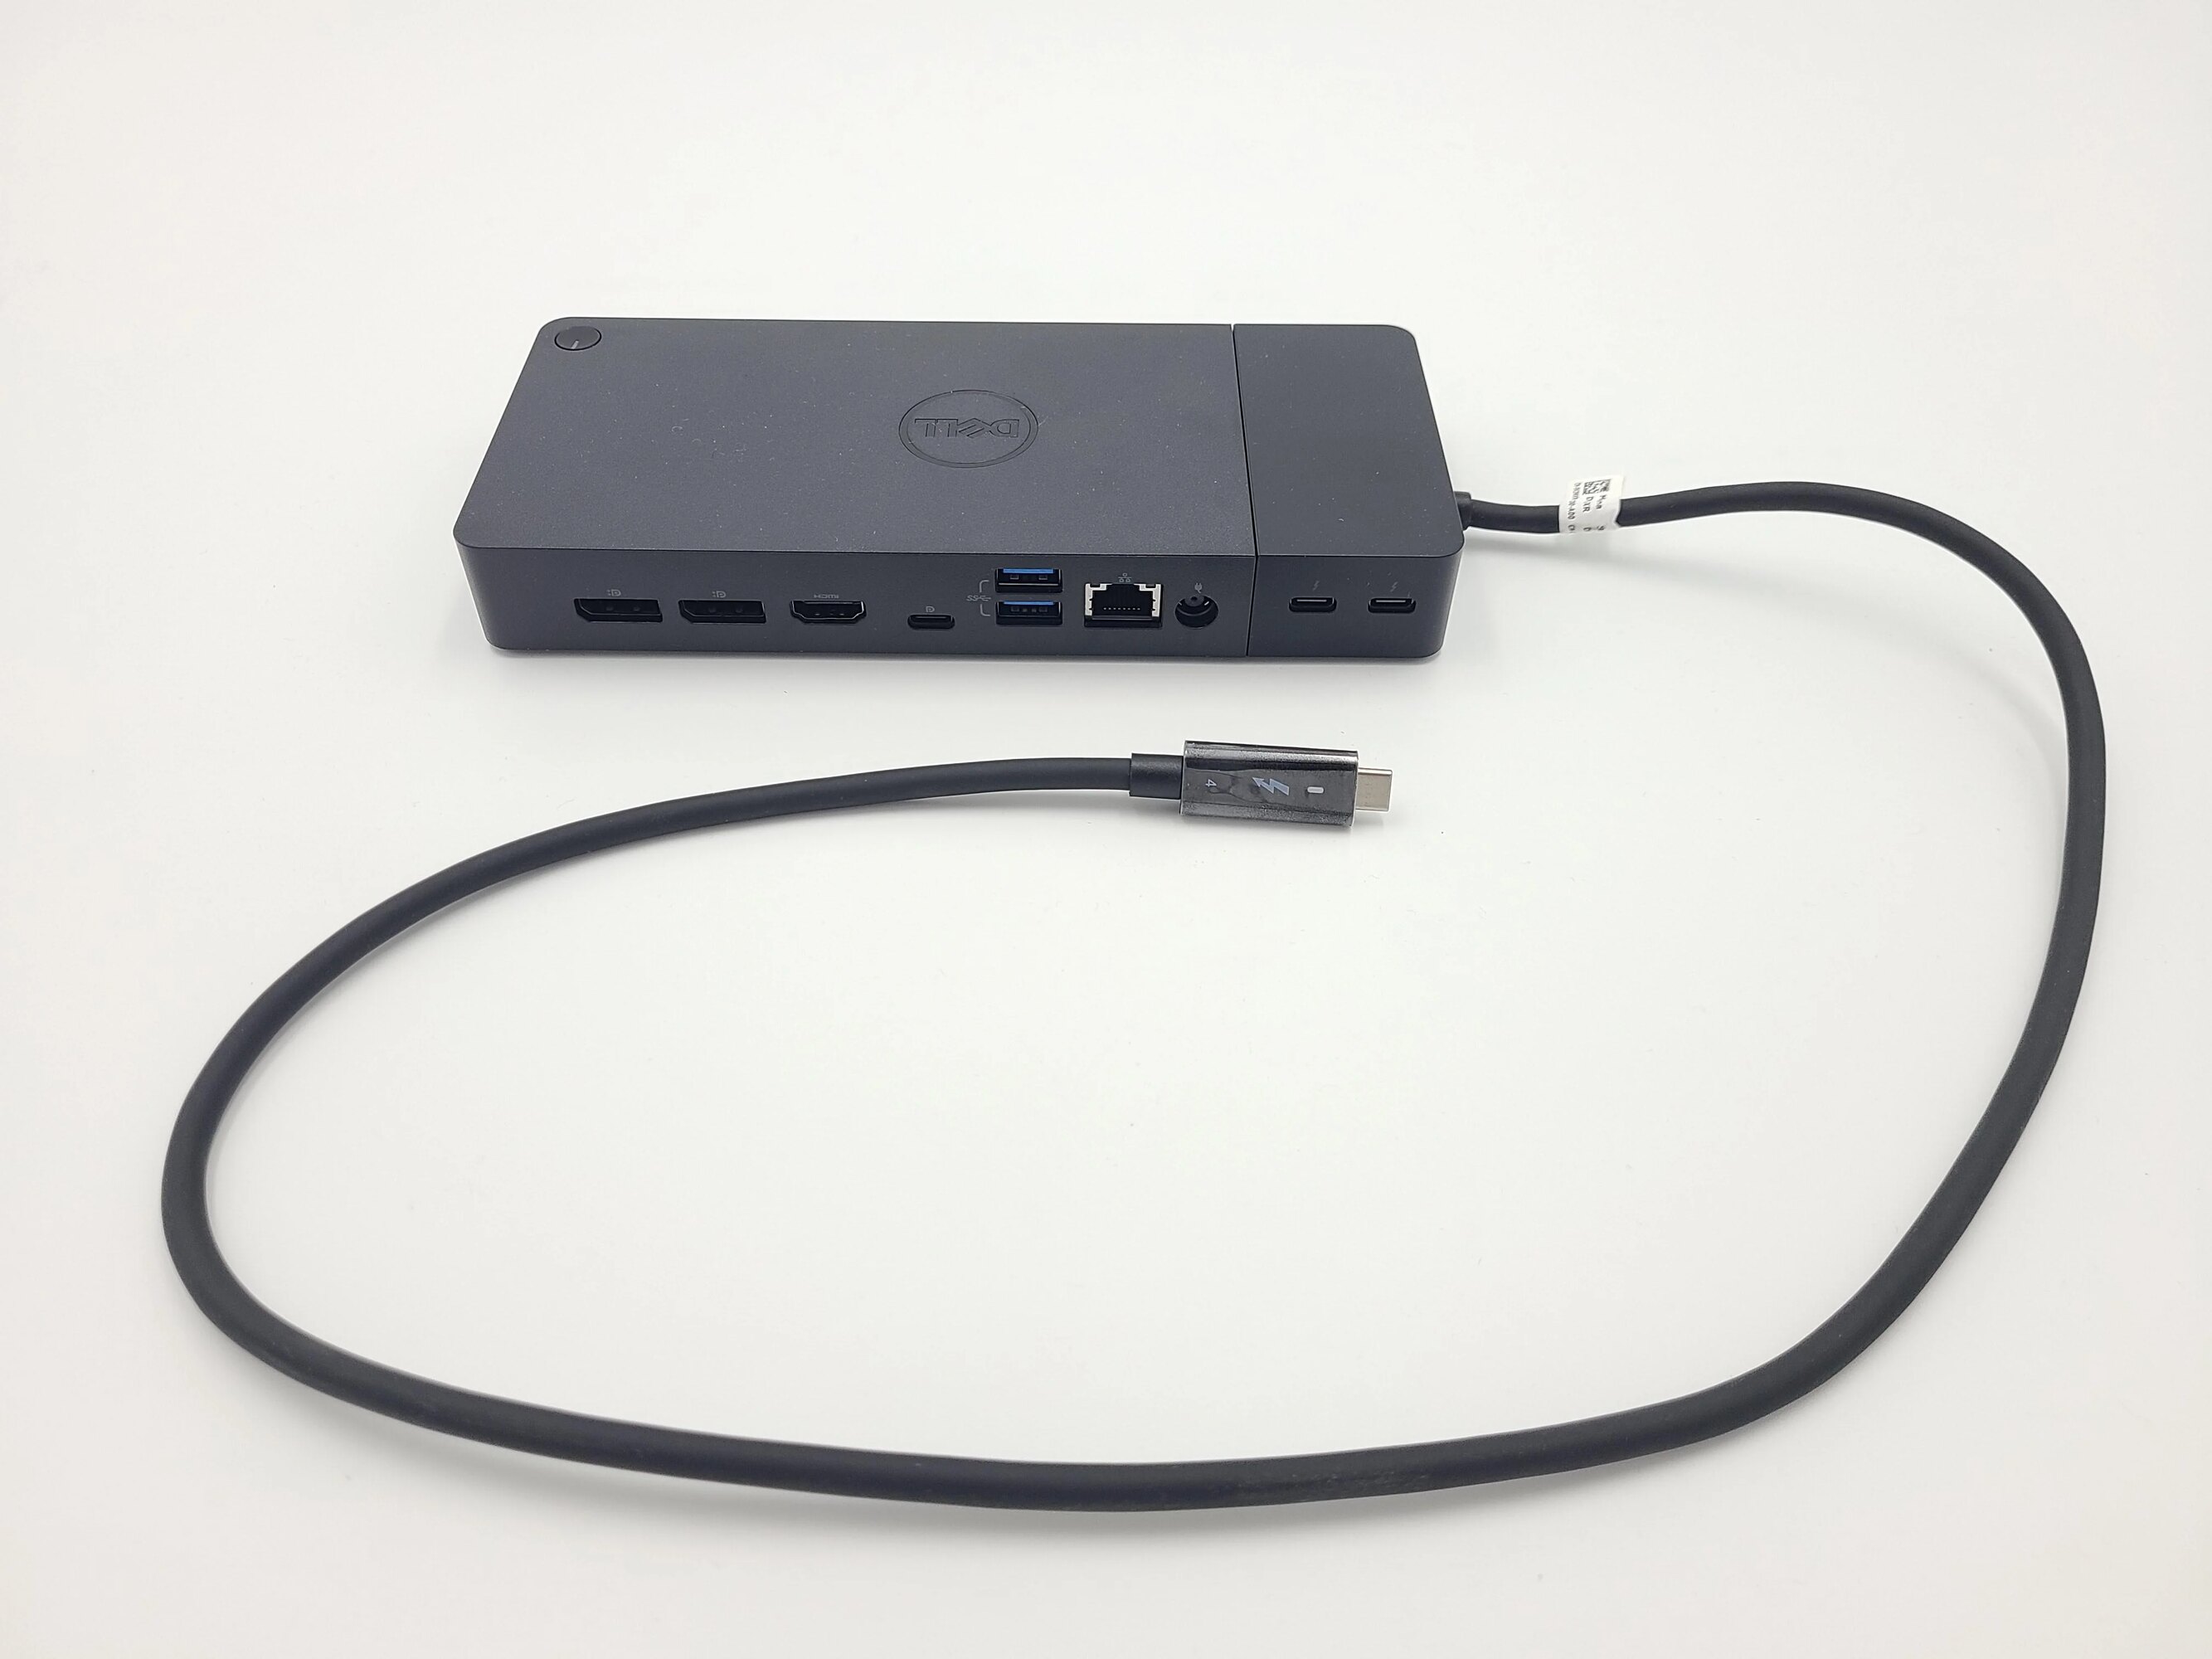 What Is Dell Thunderbolt Dock